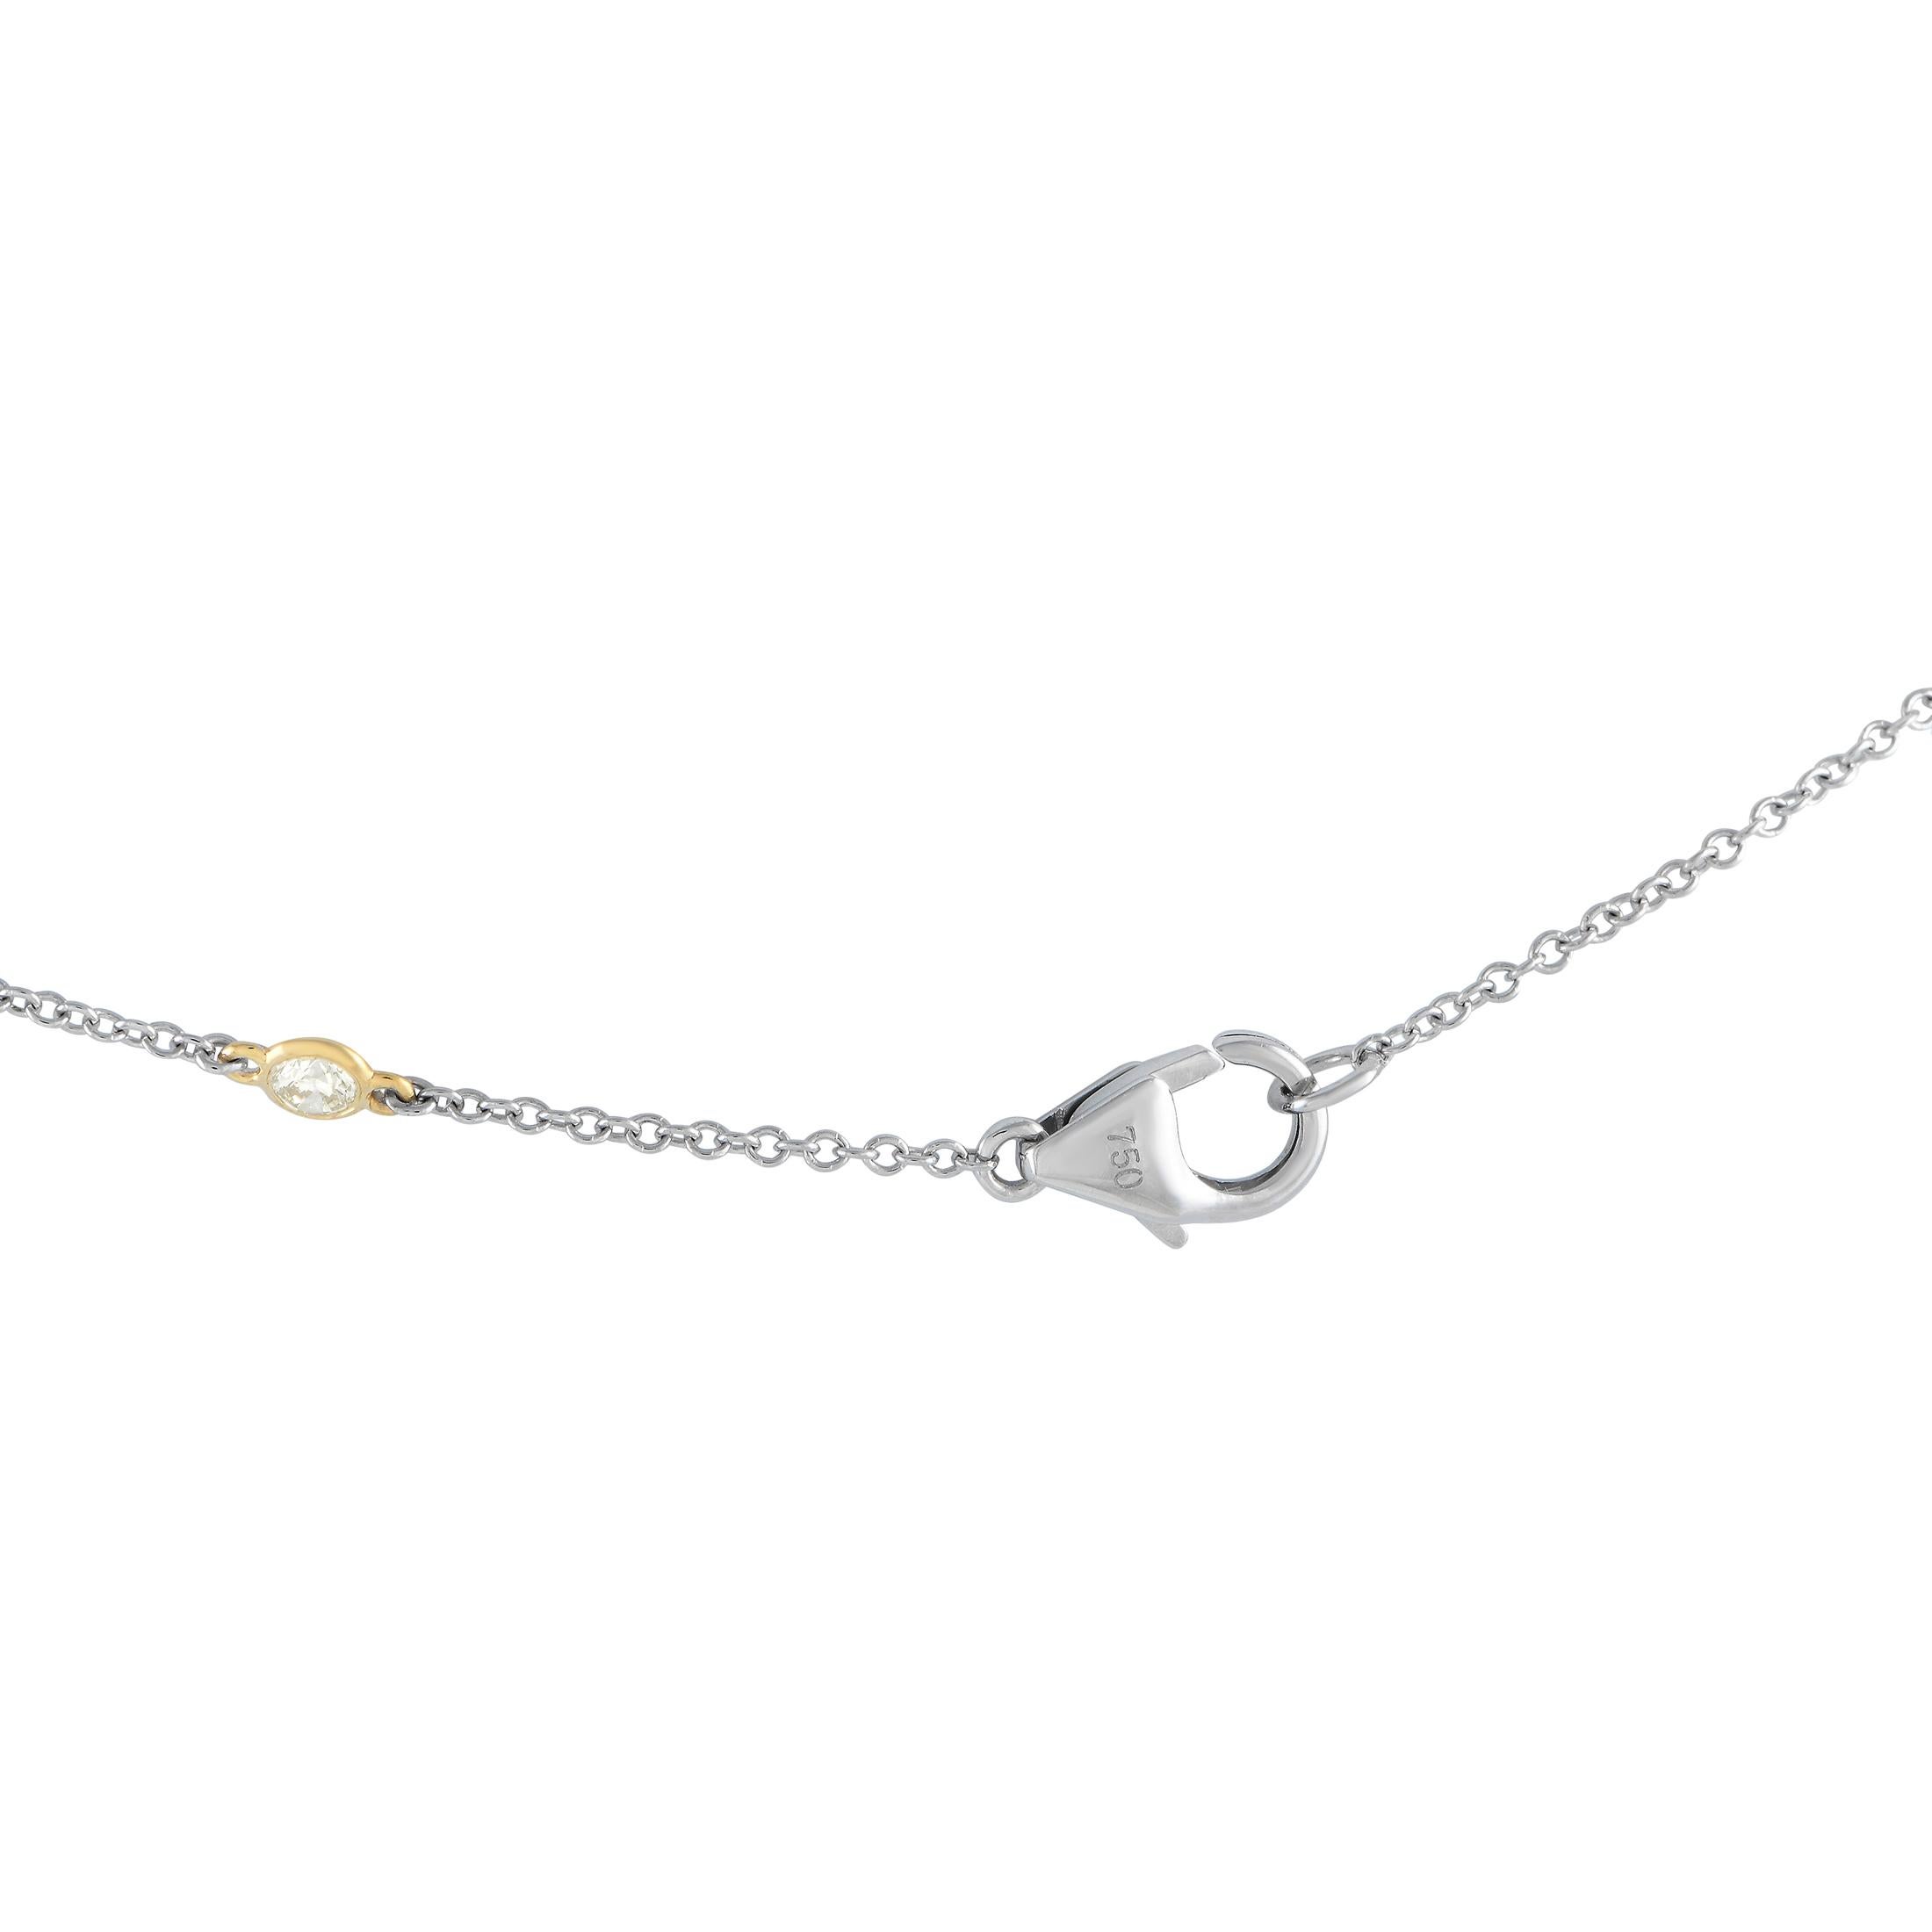 Round Cut LB Exclusive 18K White and Yellow Gold 1.28ct Diamond Station Necklace